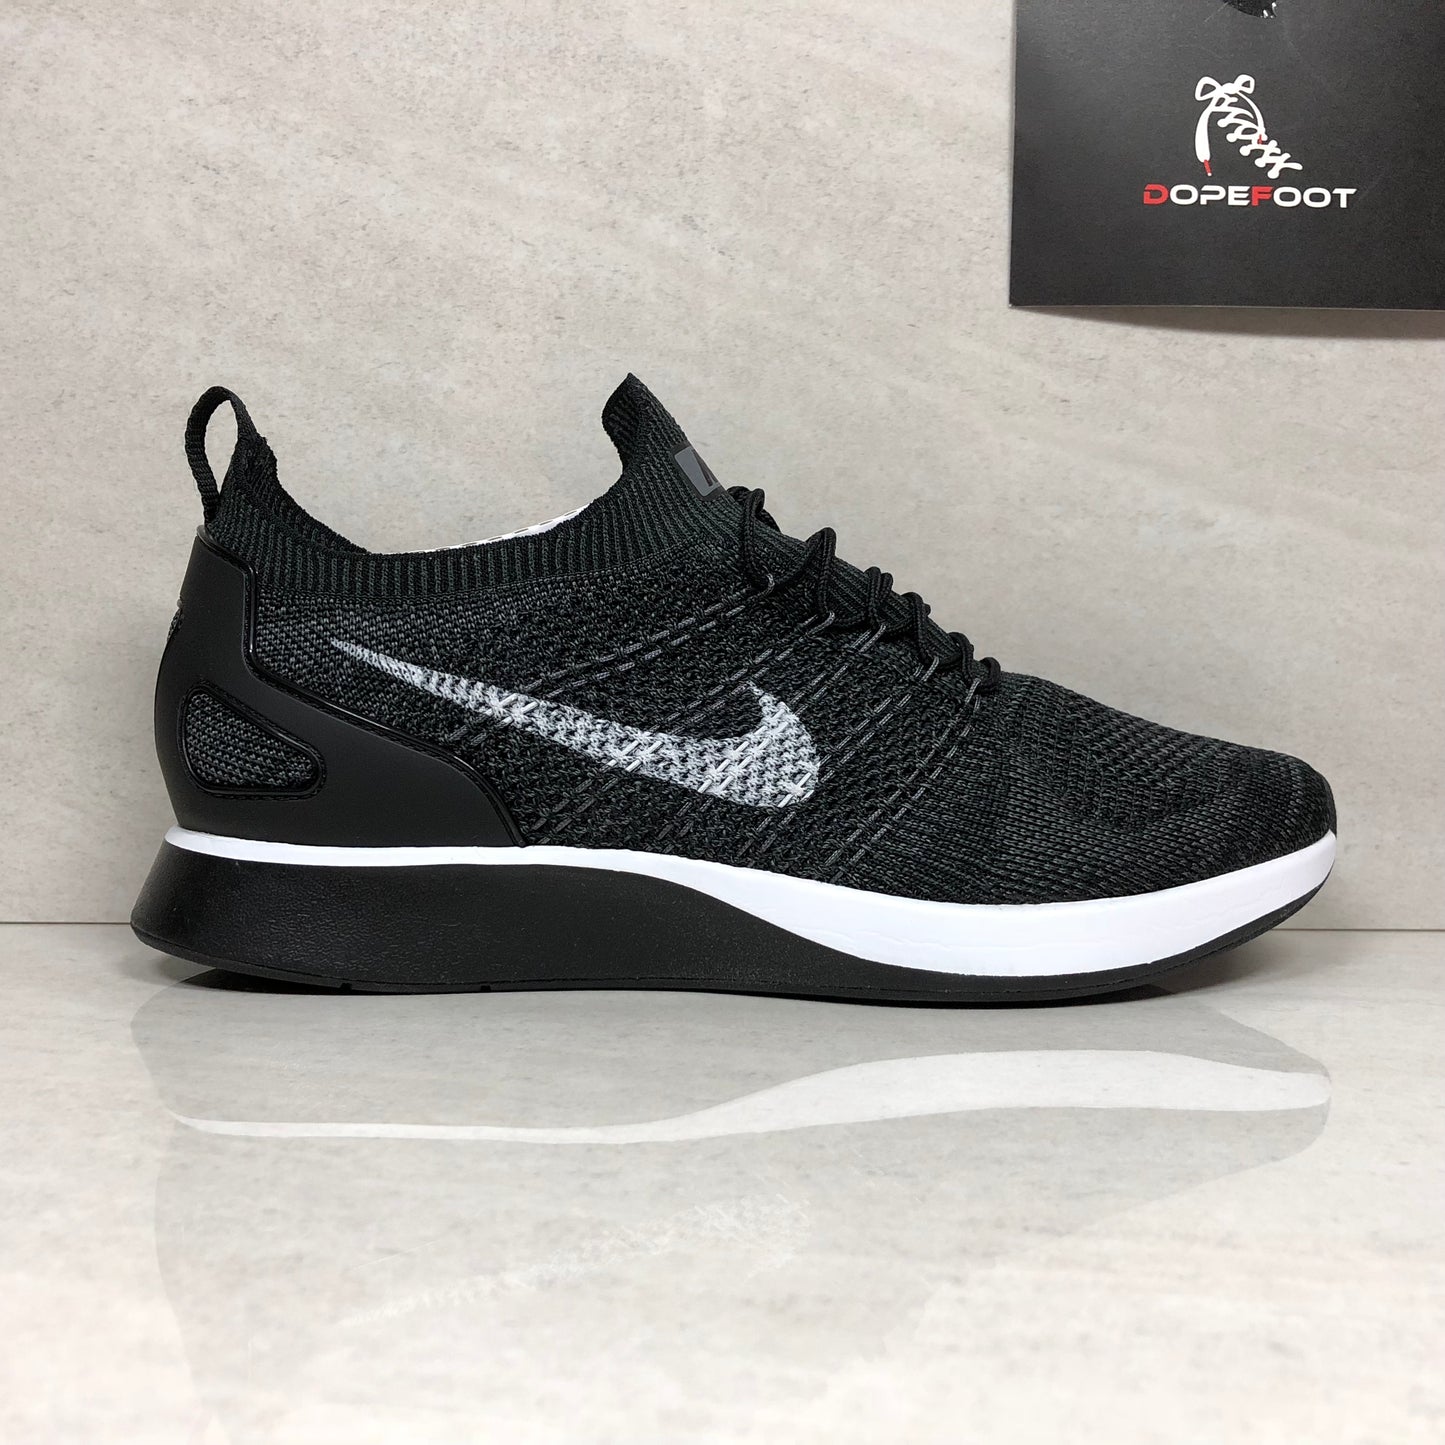 Nike Air Zoom Mariah Flyknit Racer 918264-010 Homme Taille 9/Taille 10/10.5/Taille 12 Noir/Blanc